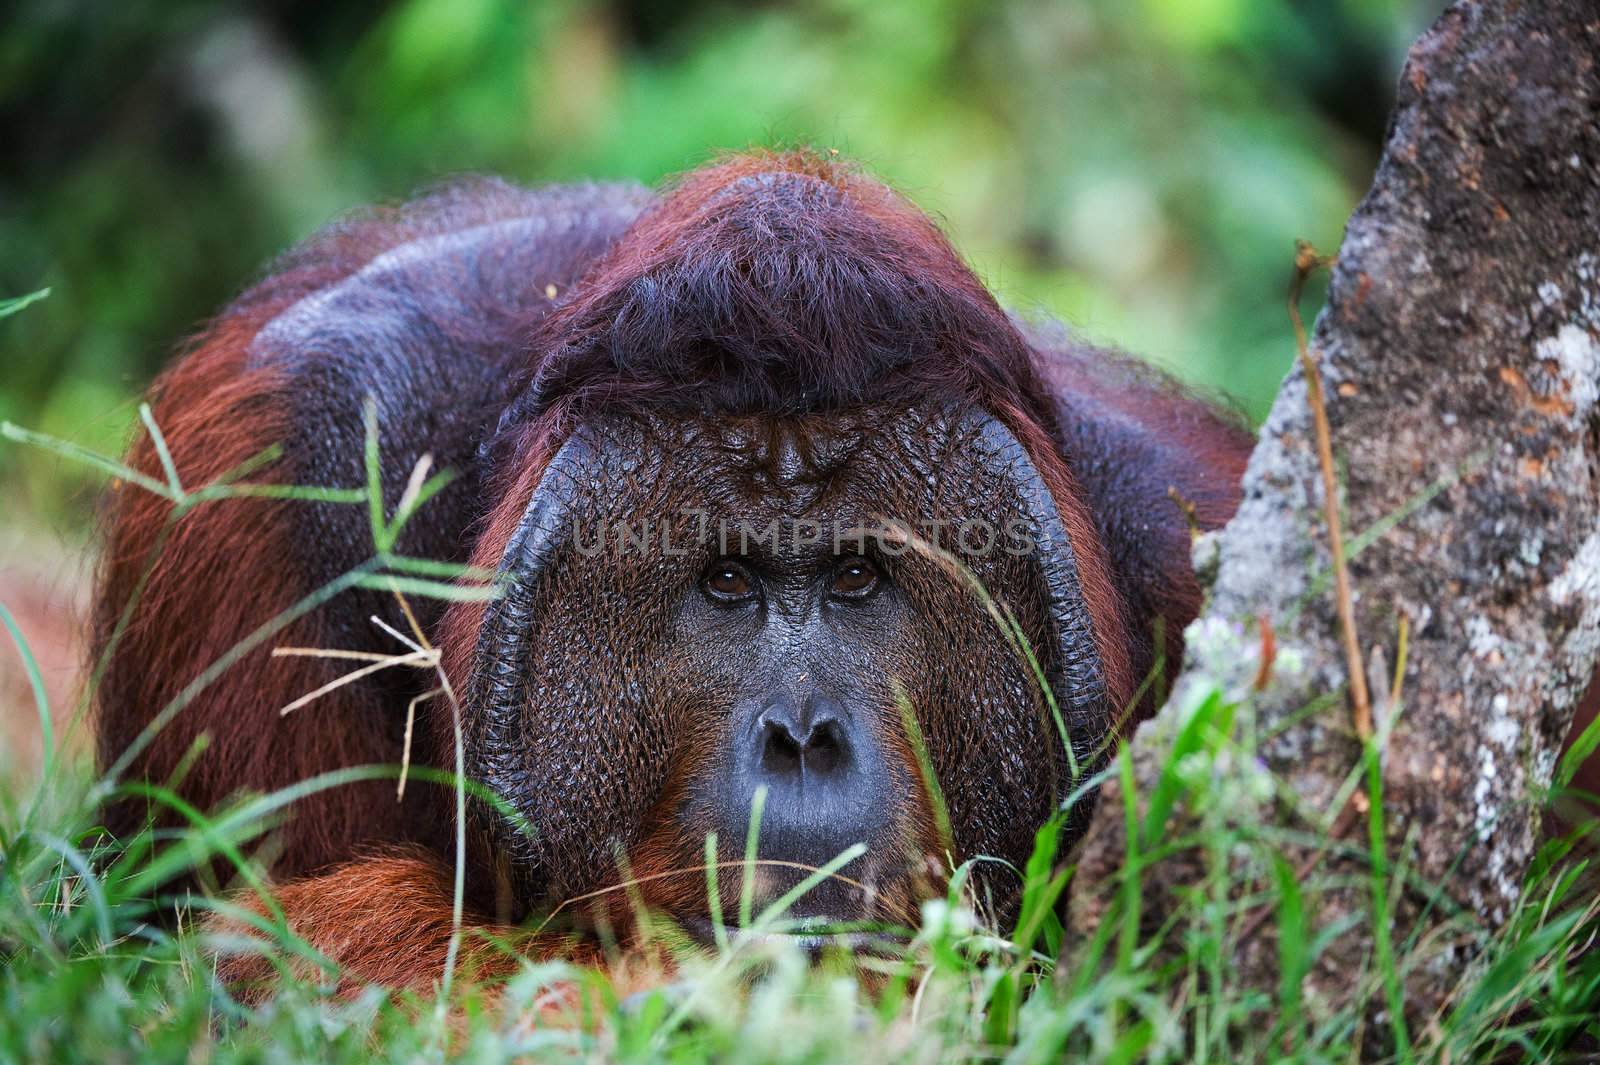 The male of the orangutan has a rest under a tree and observes of tourists.